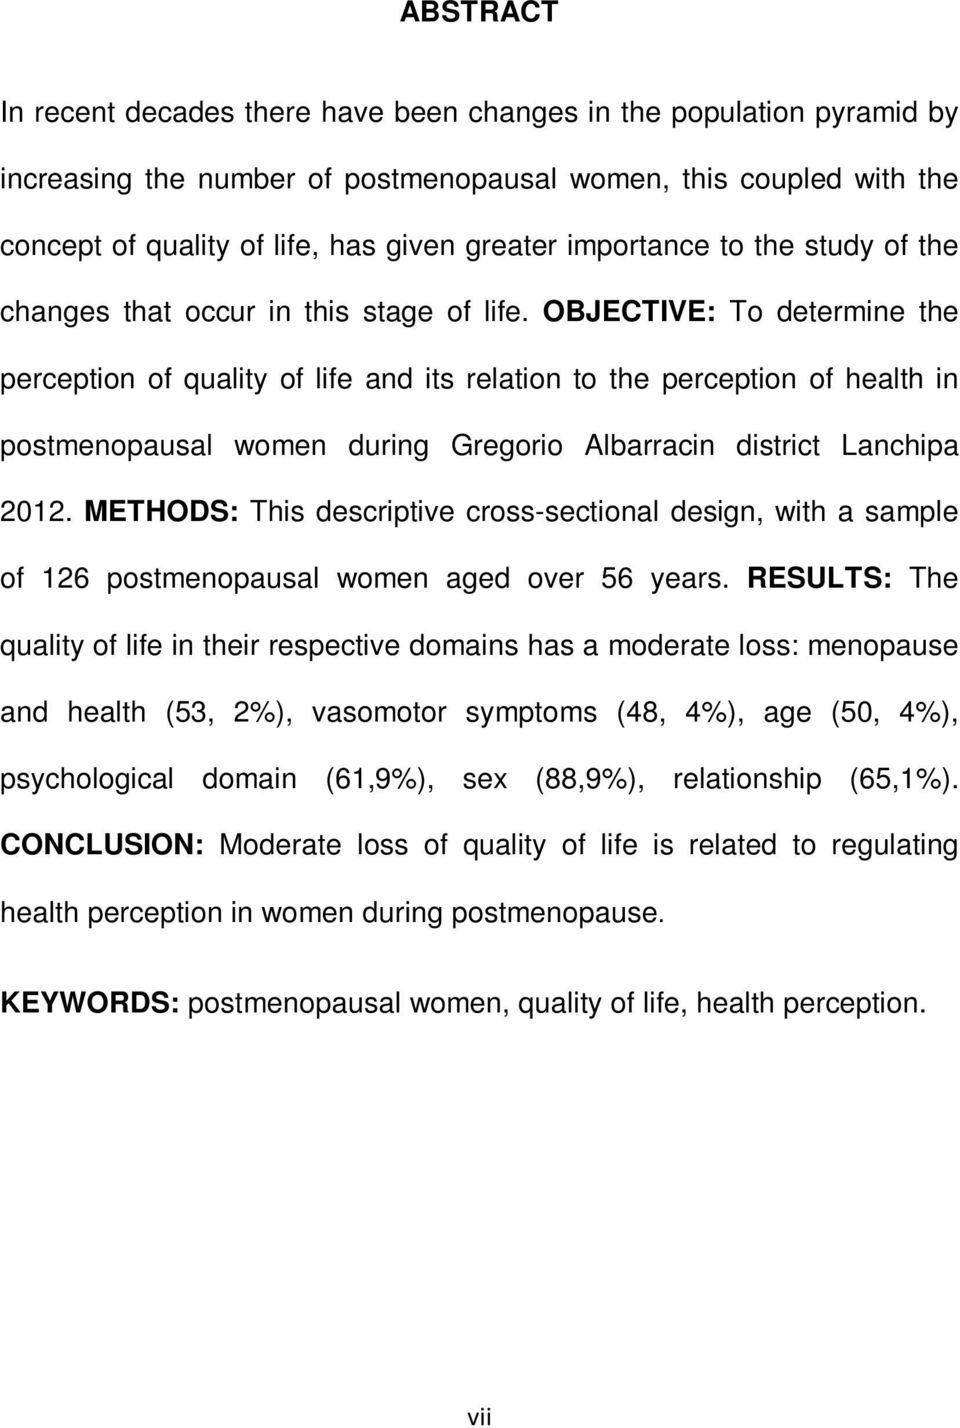 OBJECTIVE: To determine the perception of quality of life and its relation to the perception of health in postmenopausal women during Gregorio Albarracin district Lanchipa 2012.